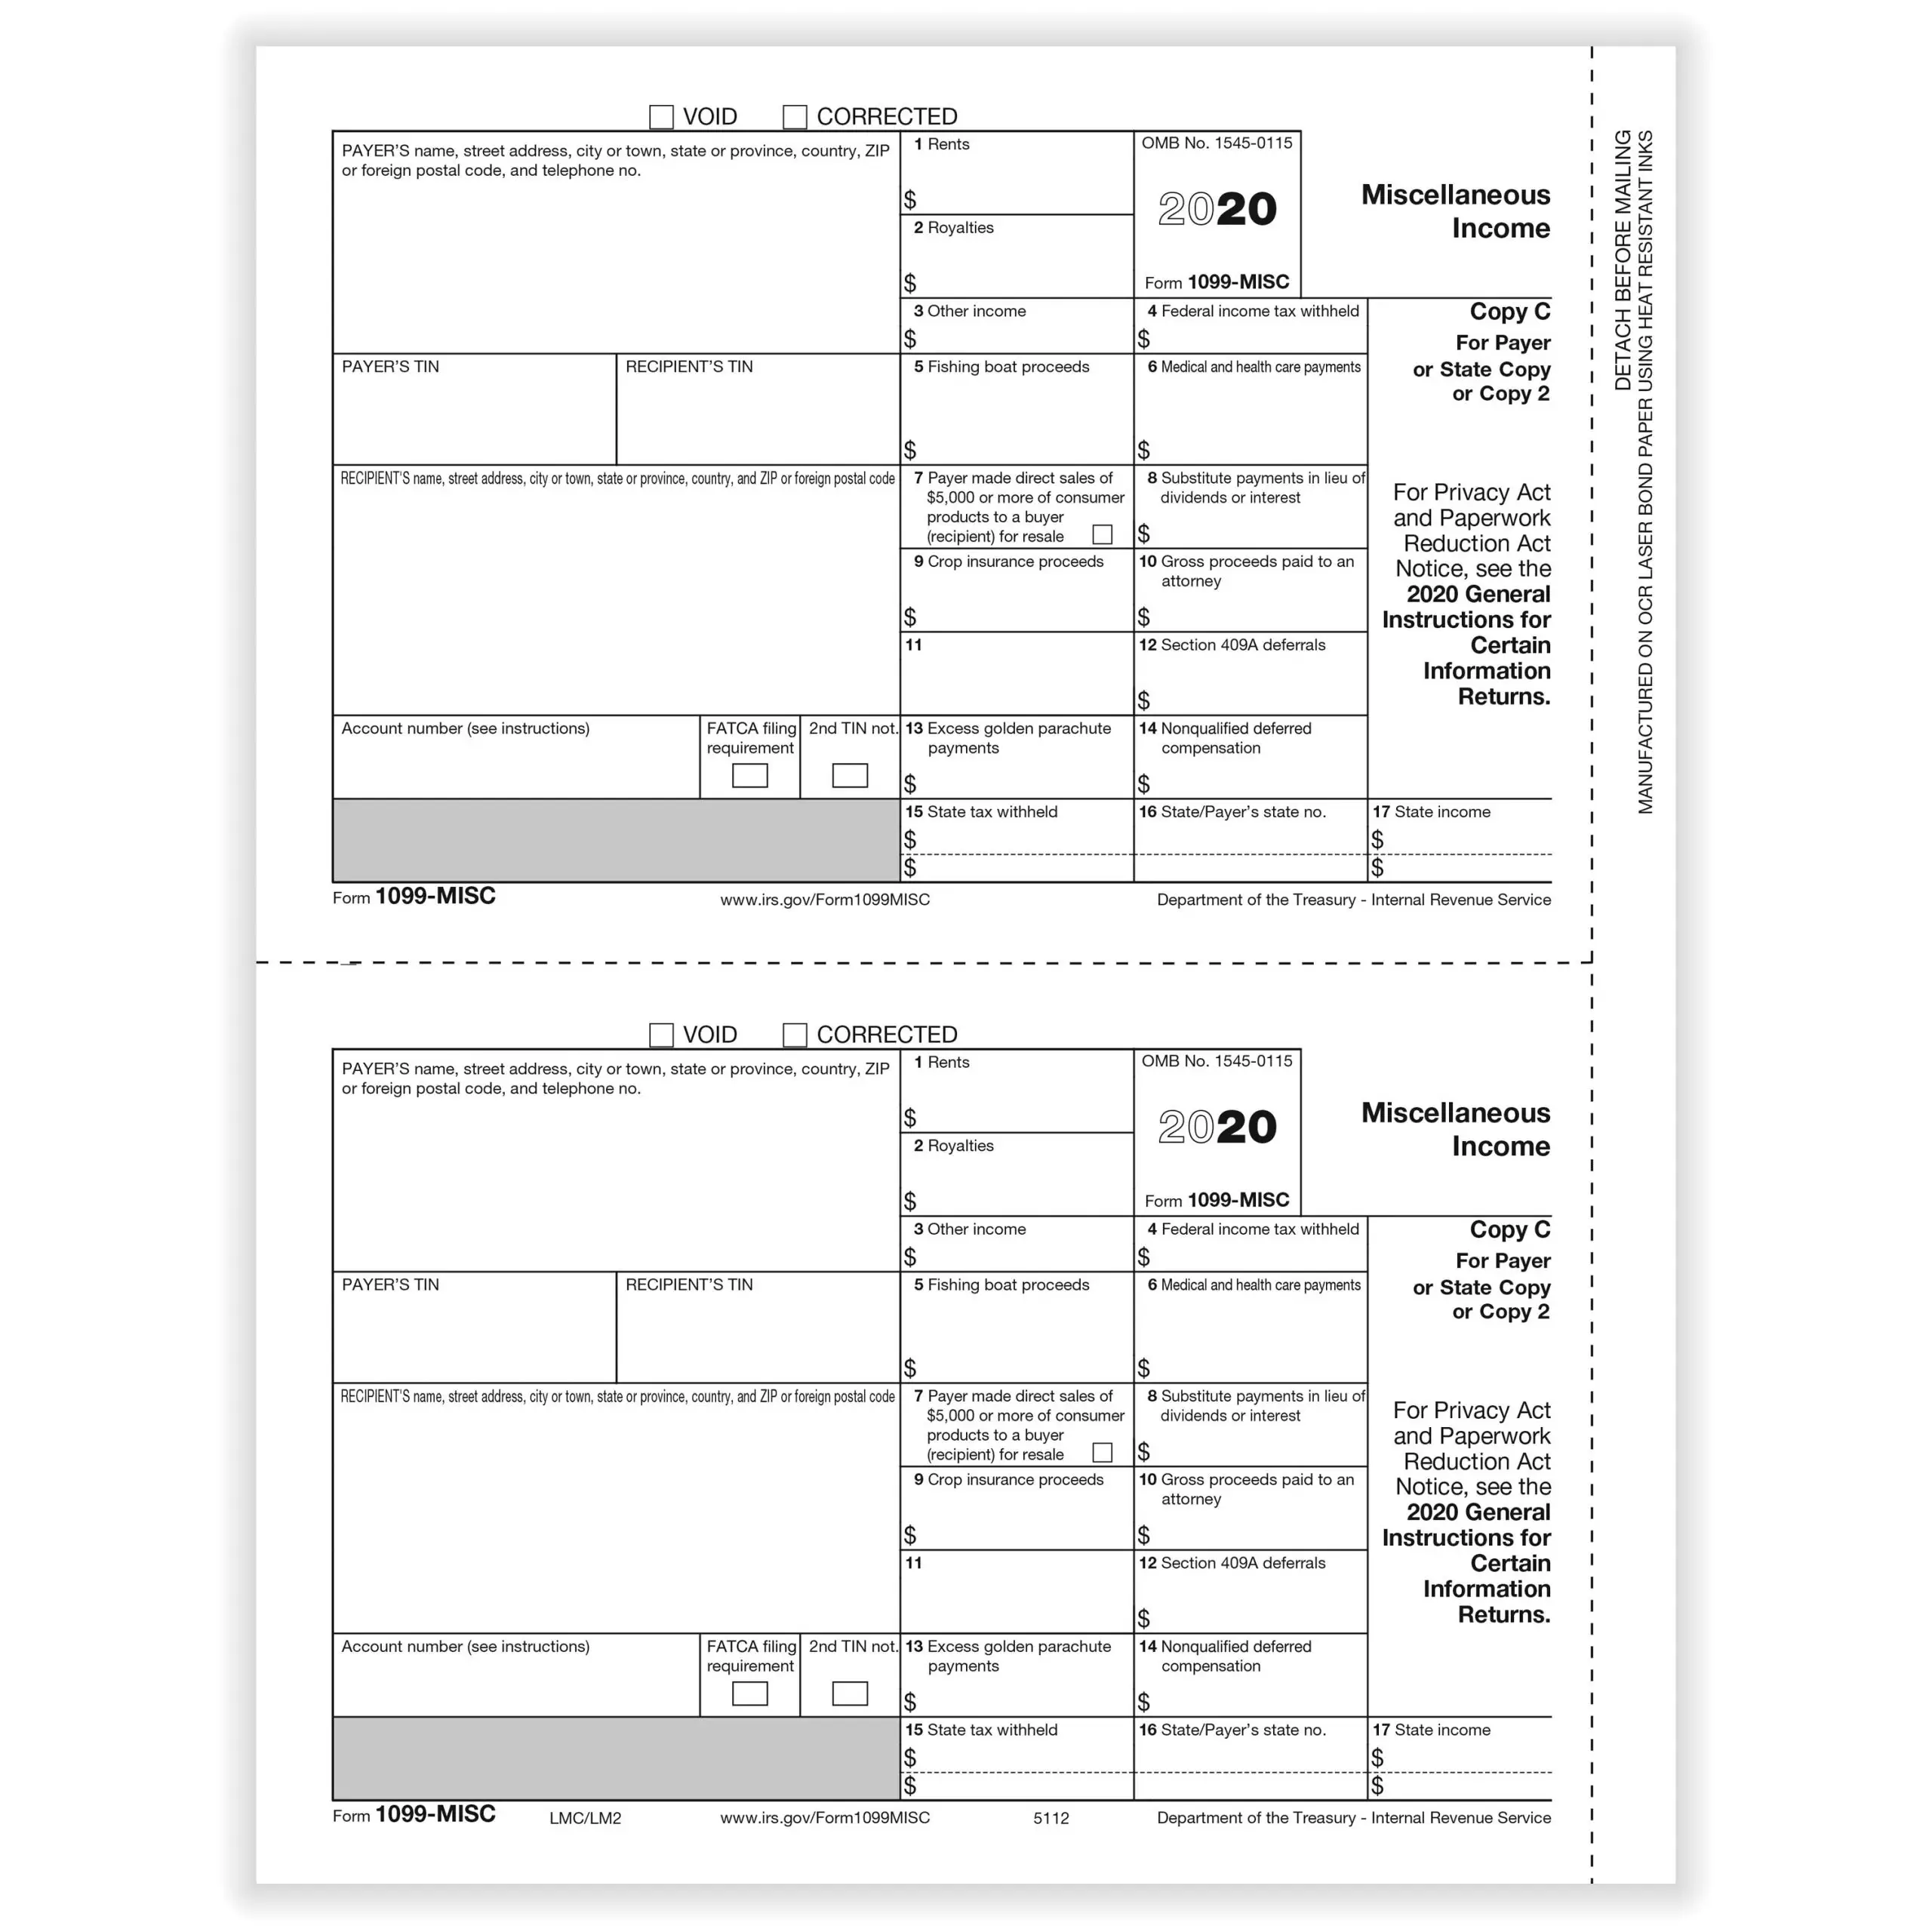 1099 MISC Income Form